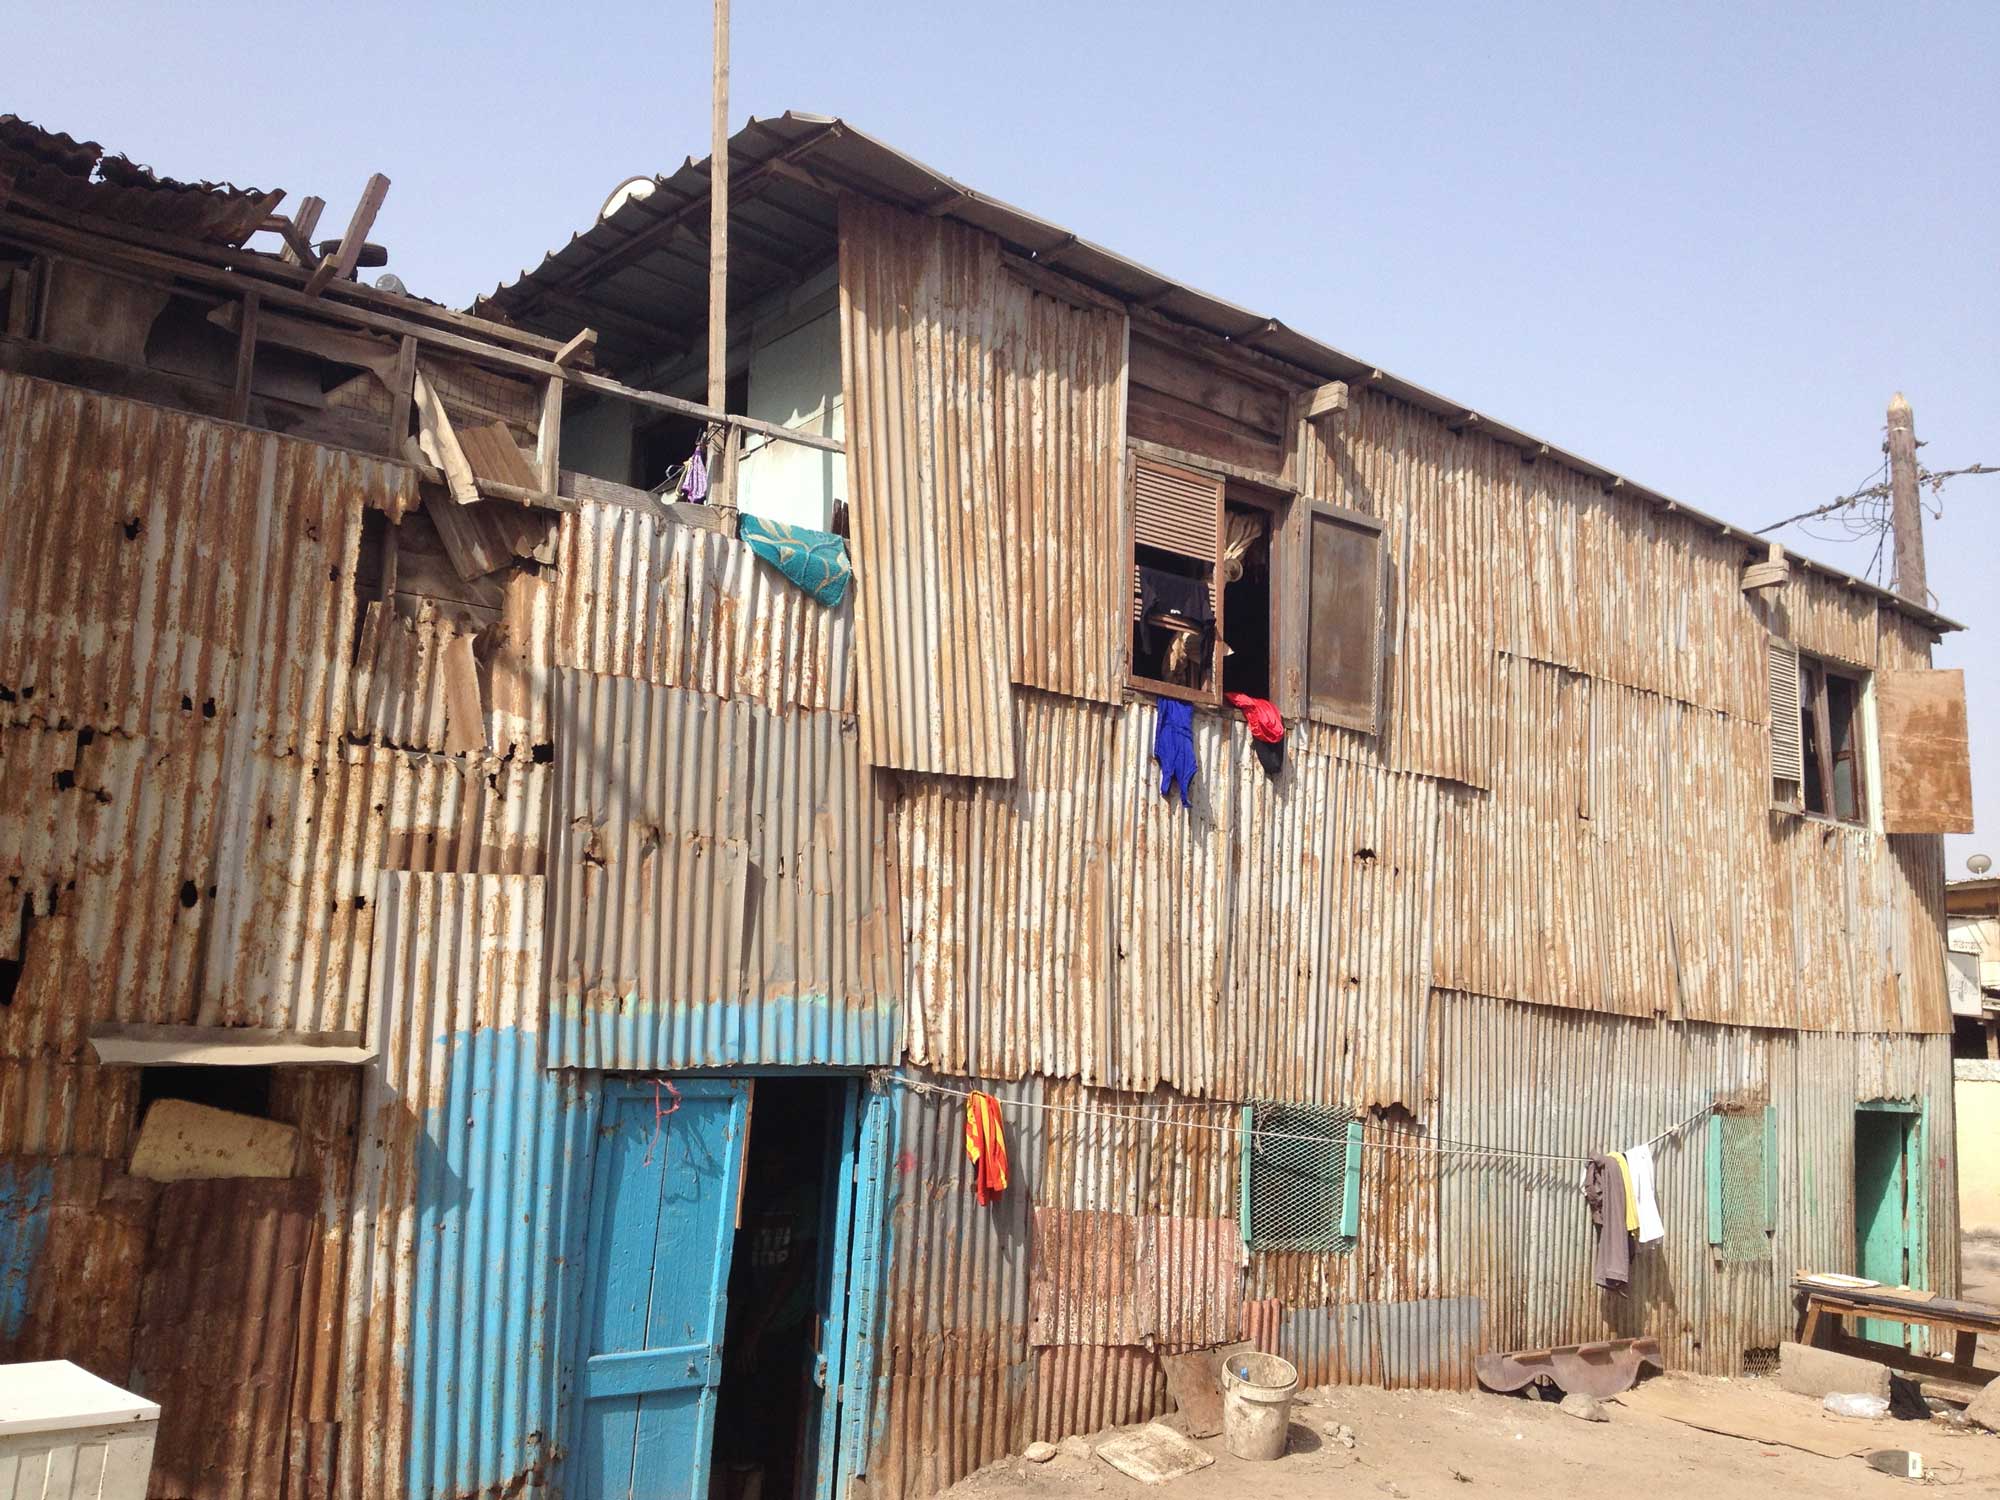 A shack made of corrugated metal that is beginning to rust in the intense heat. Lines of clothes that are drying in the sun are visible around the house and the doors are painted bright green and blue.